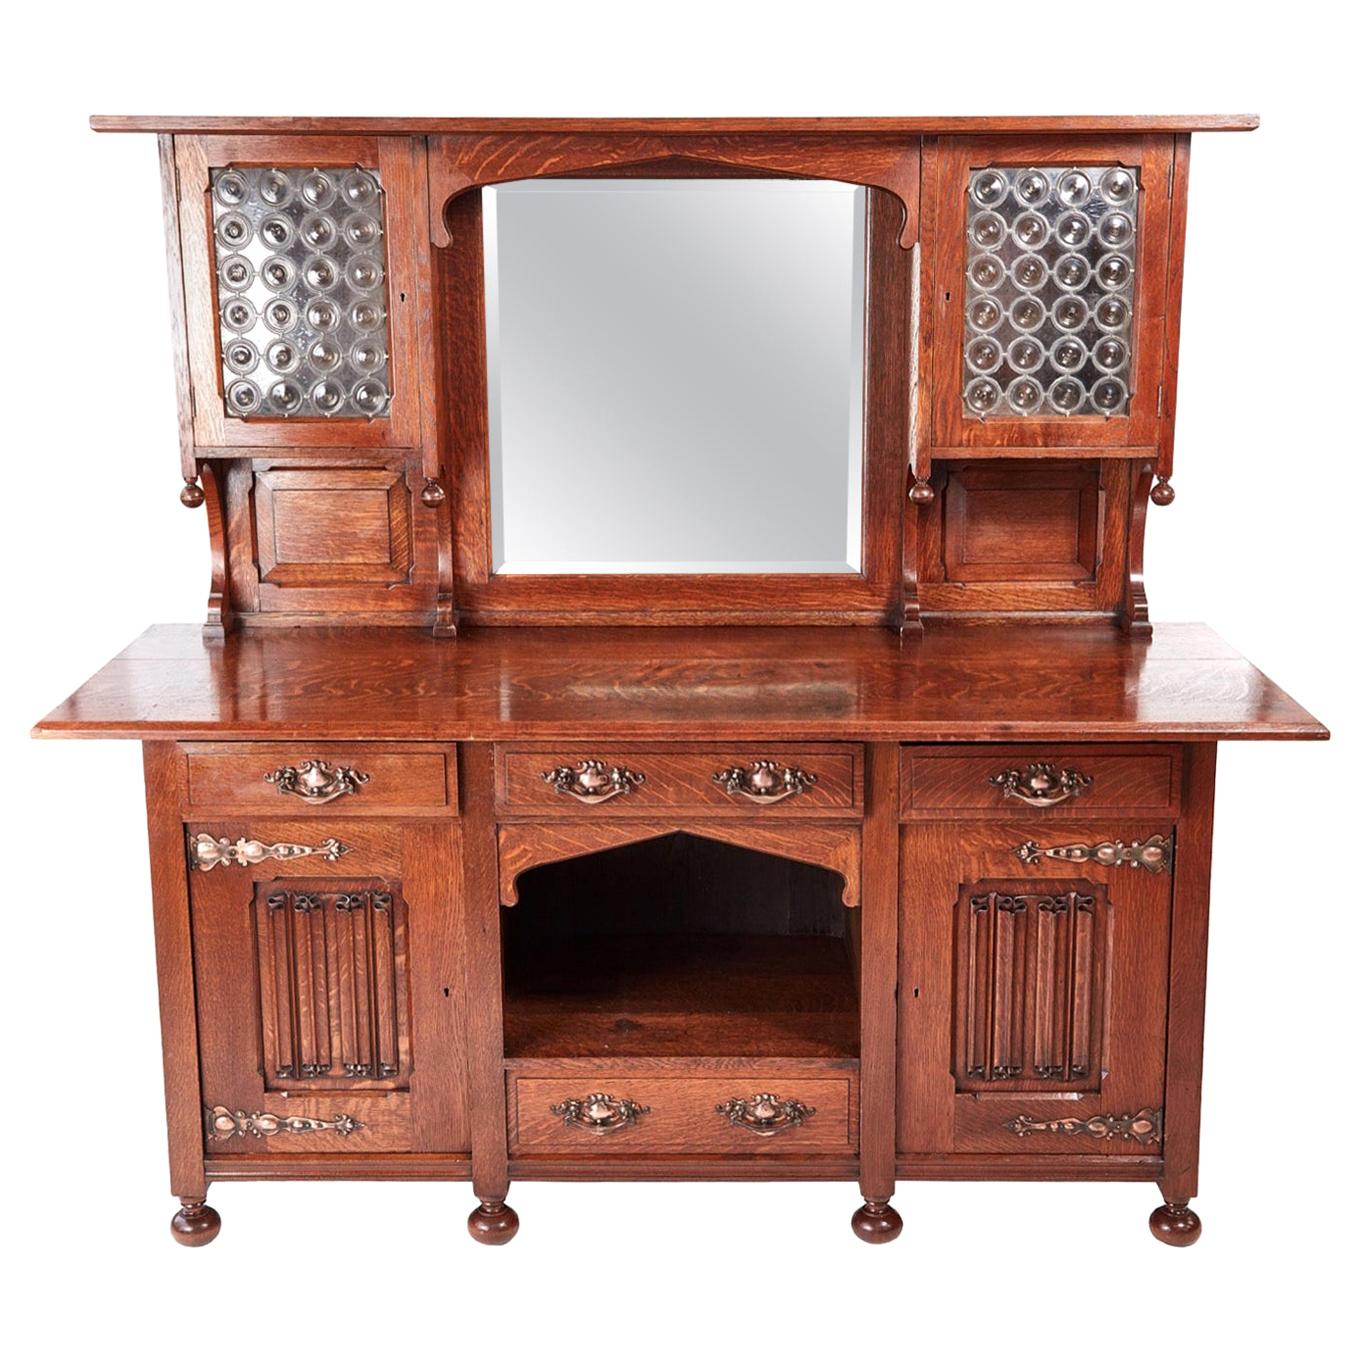 Outstanding Quality Antique Victorian Oak Arts & Crafts Sideboard